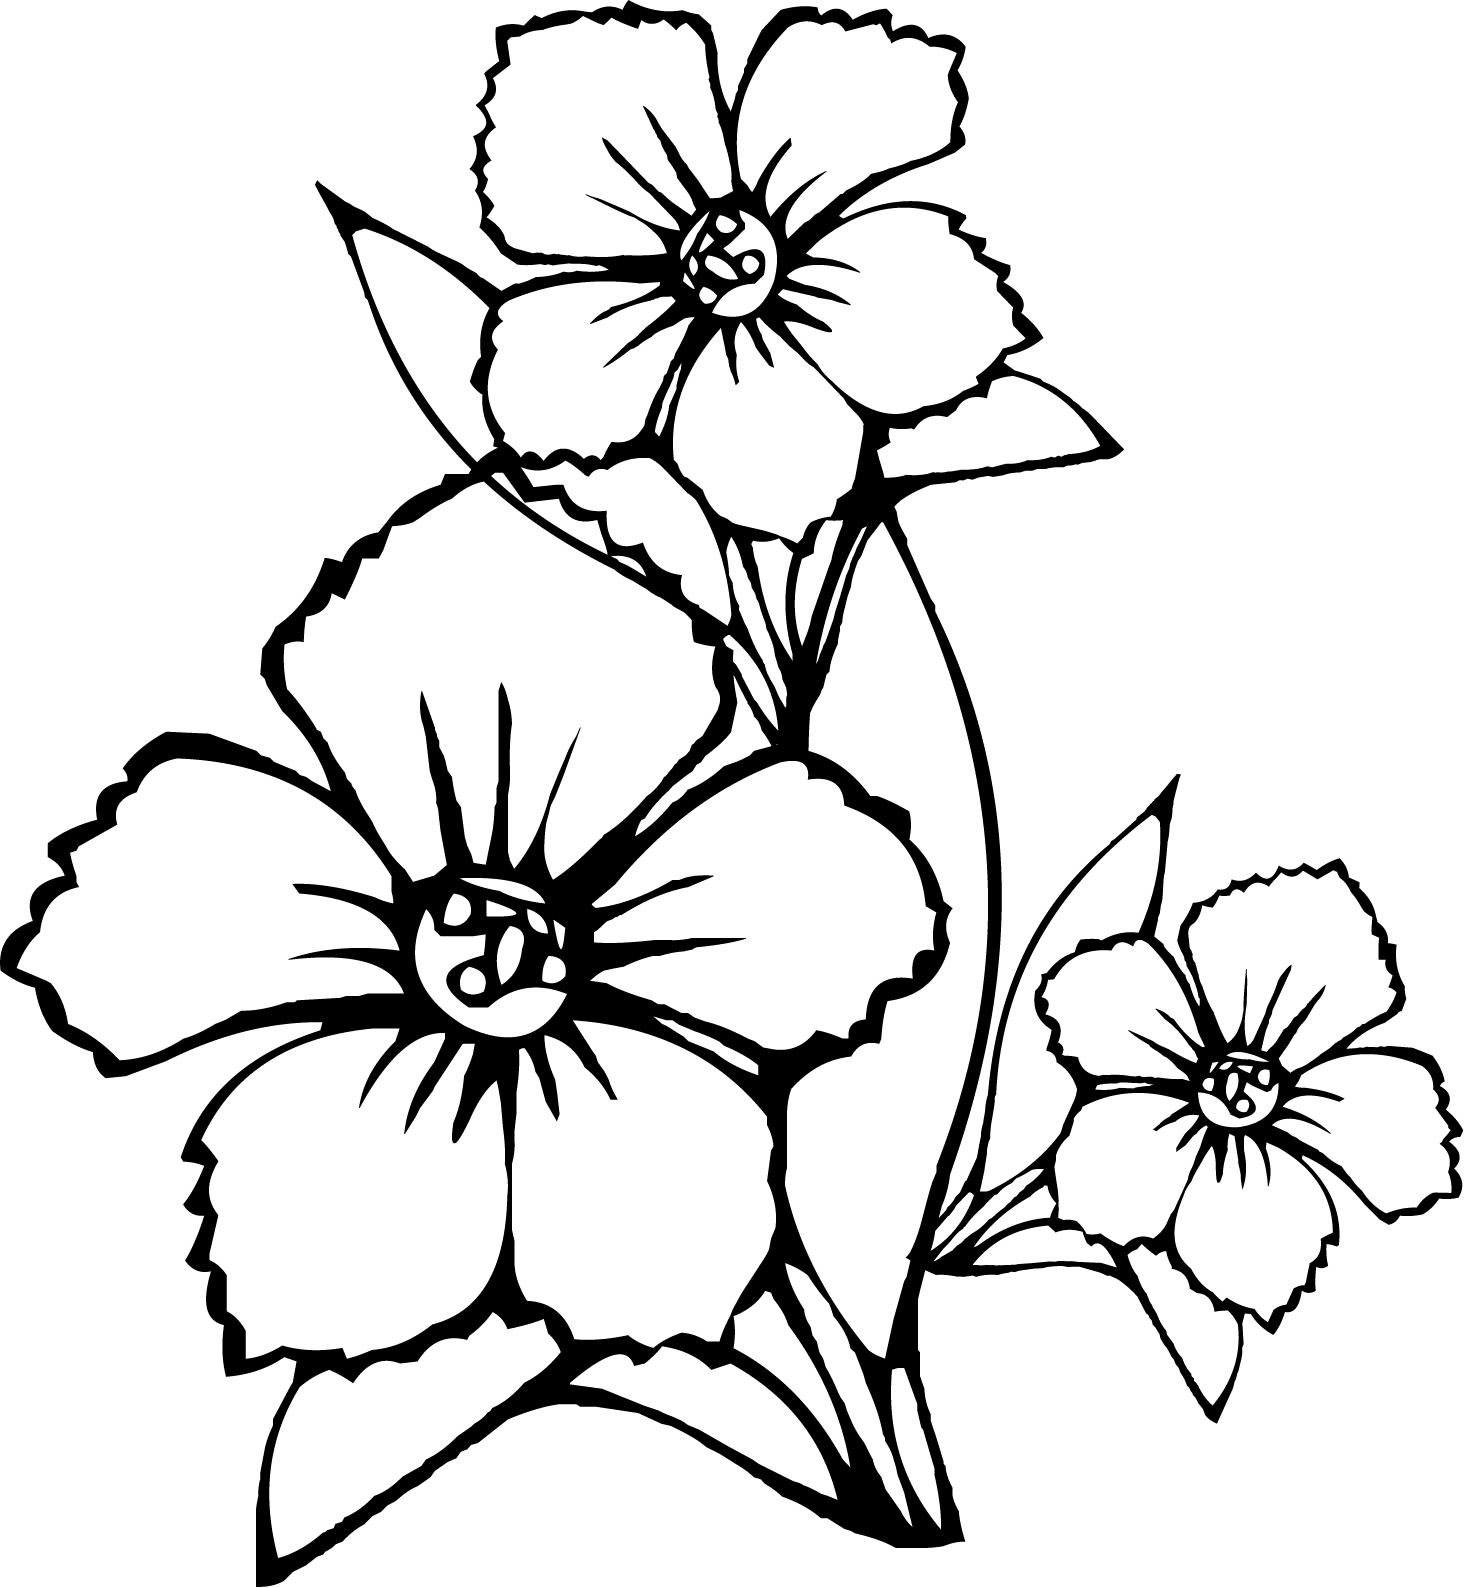 Flowers coloring pages | color printing | Flower | Coloring pages free | #14